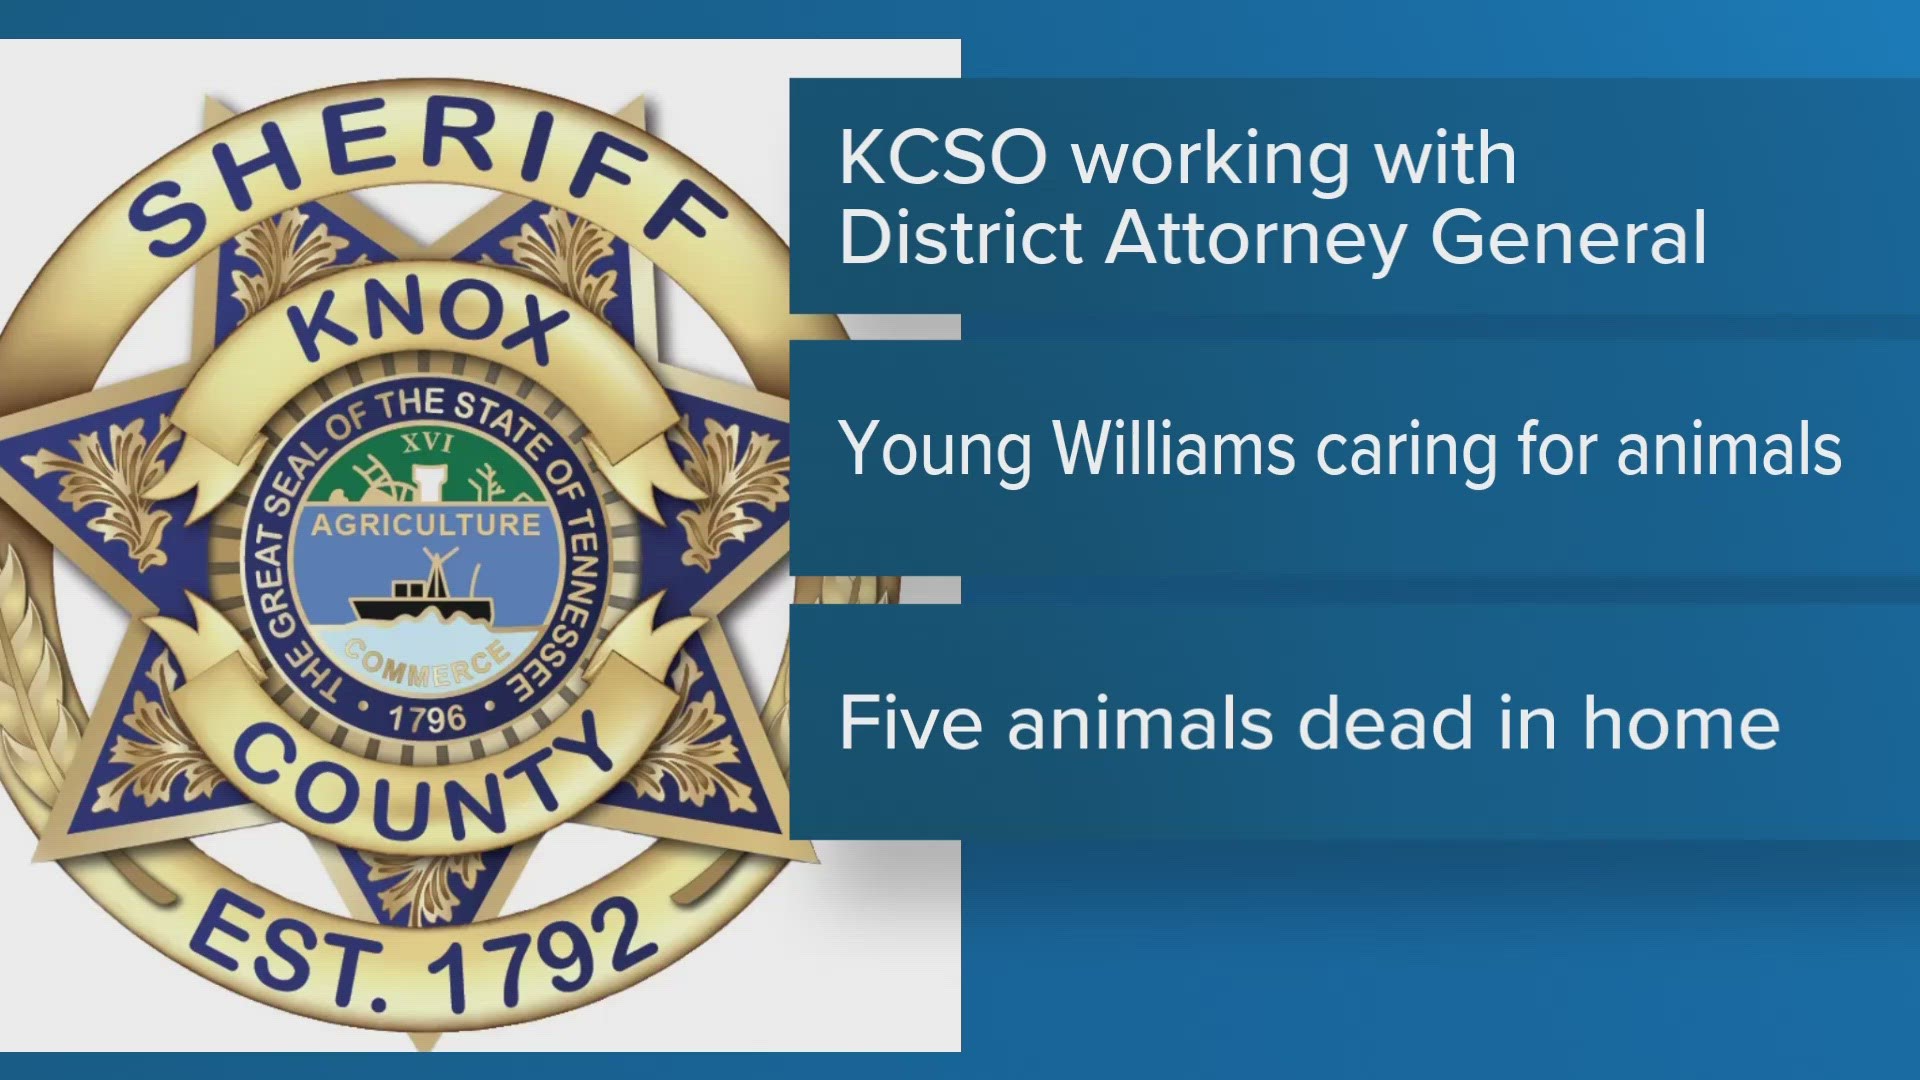 Animal control officers also found five dead animals in the home, according to Young-Williams Animal Center.